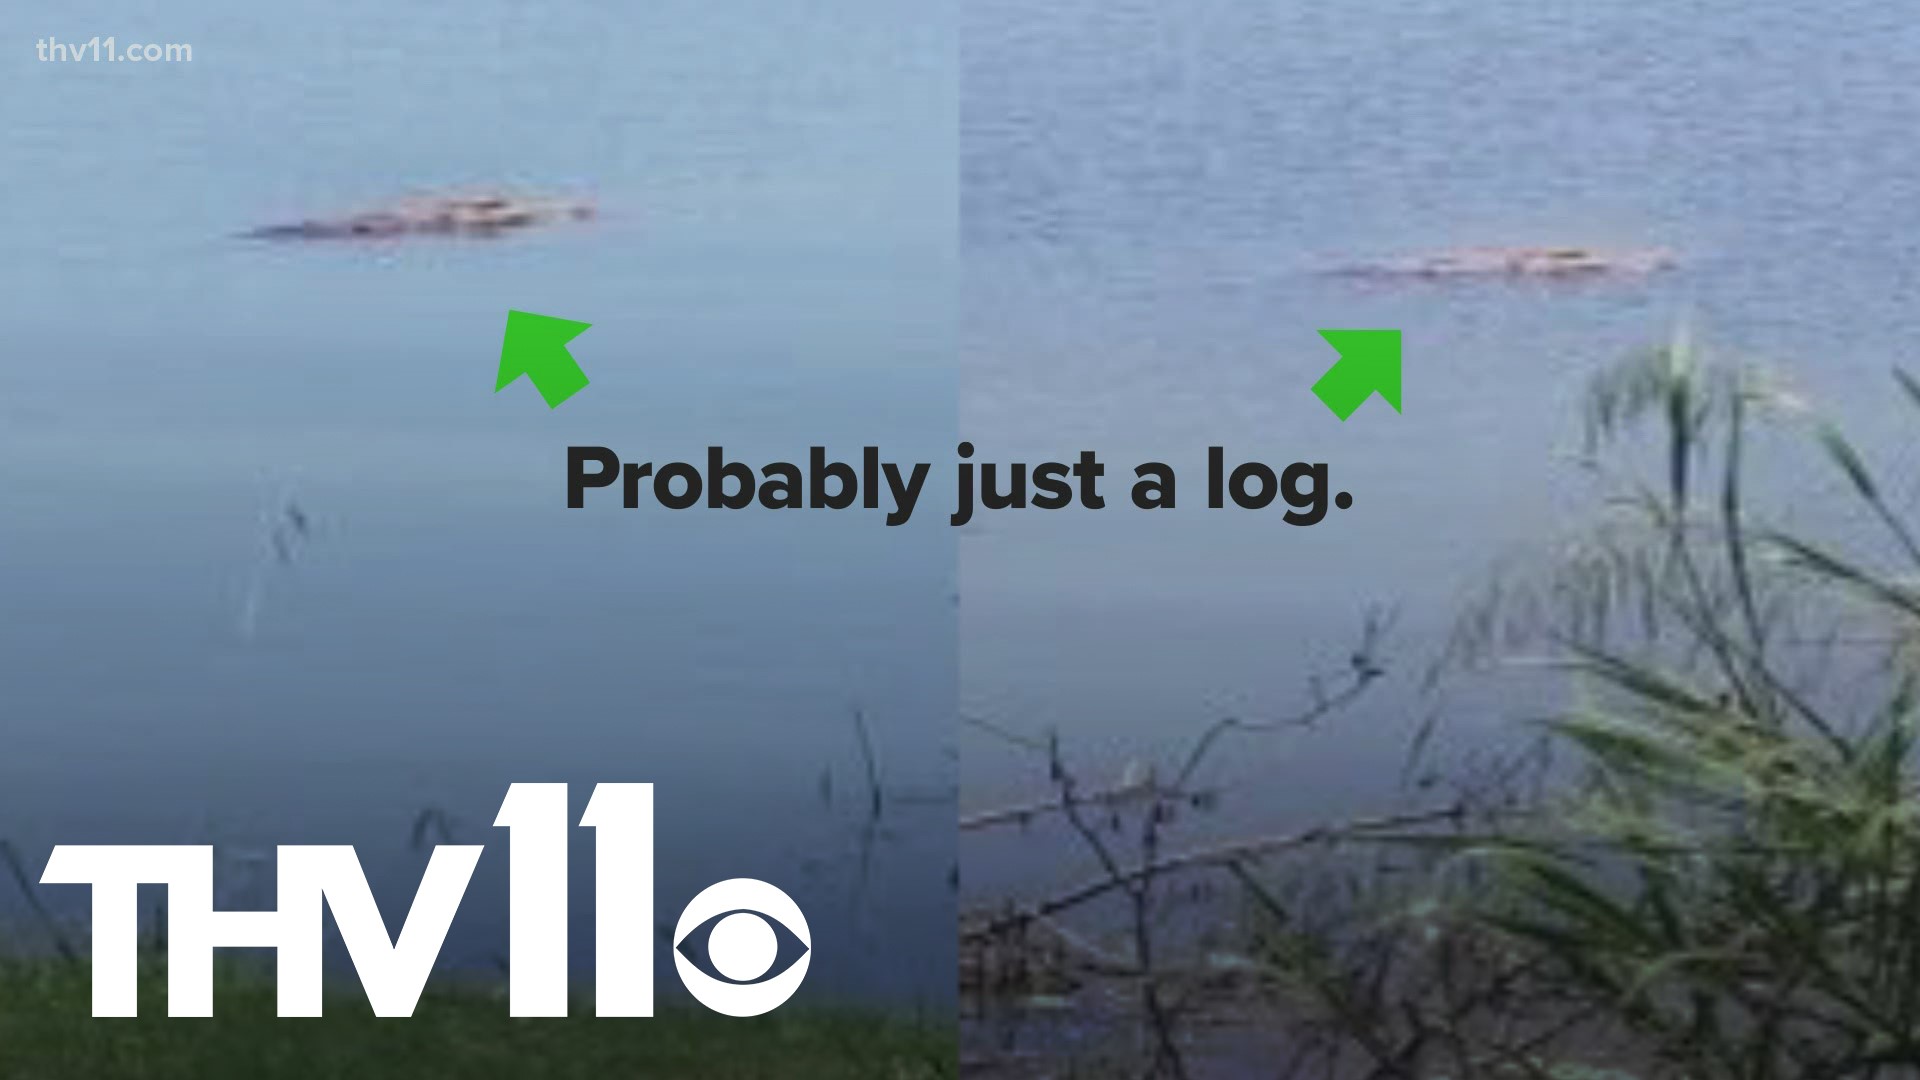 Pictures on social media are causing a stir after people claim it's an alligator, but some are saying it's just a log. We verify.